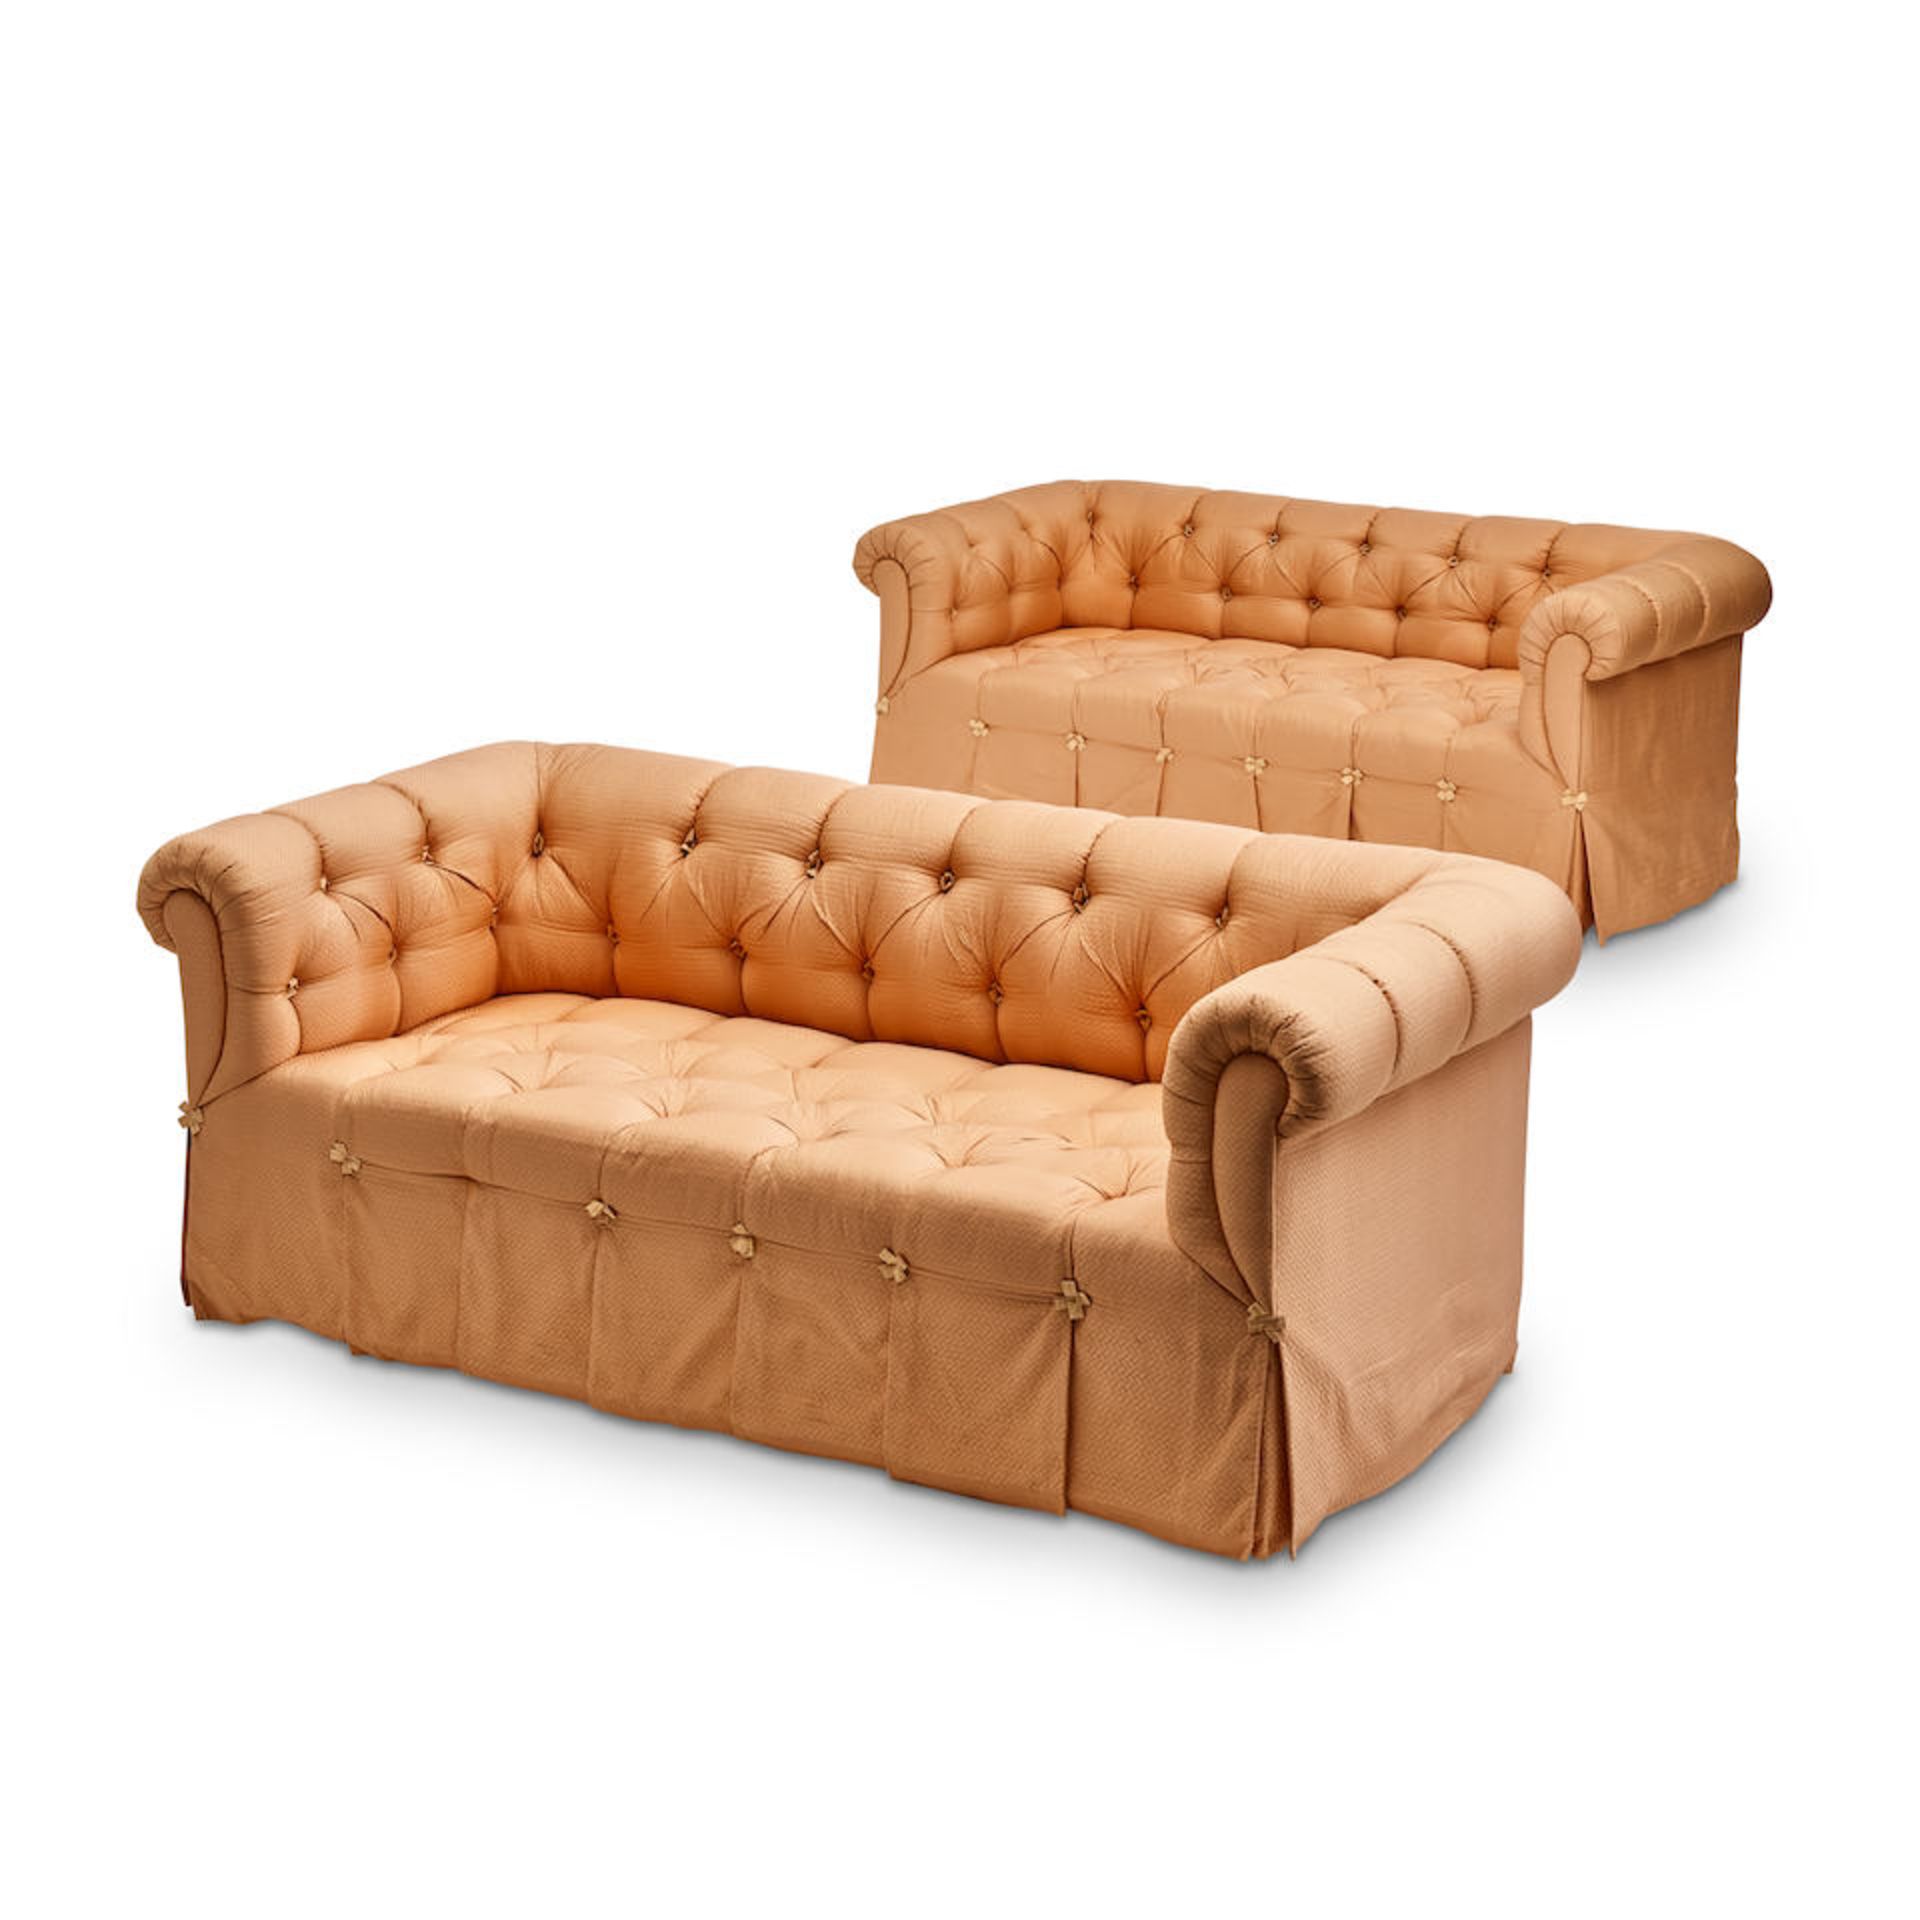 A PAIR OF CUSTOM CORAL TUFTED UPHOLSTERED SOFAS